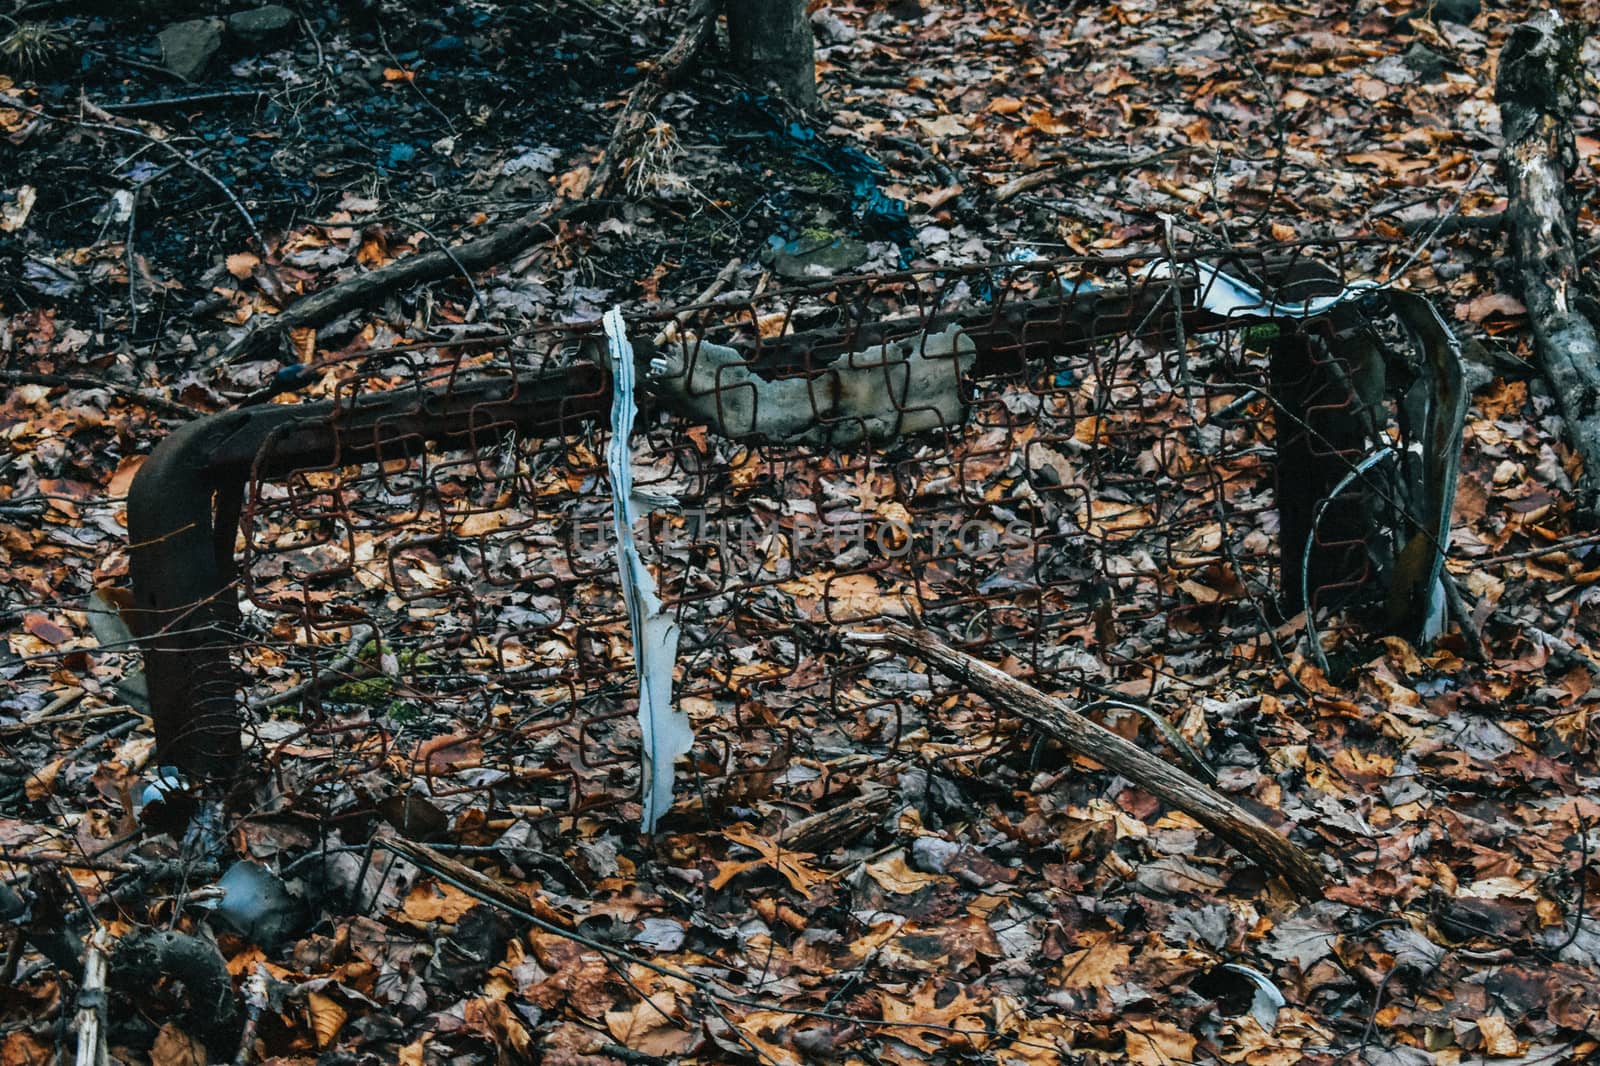 A Broken Bed Frame Left in the Autumn Forest by bju12290